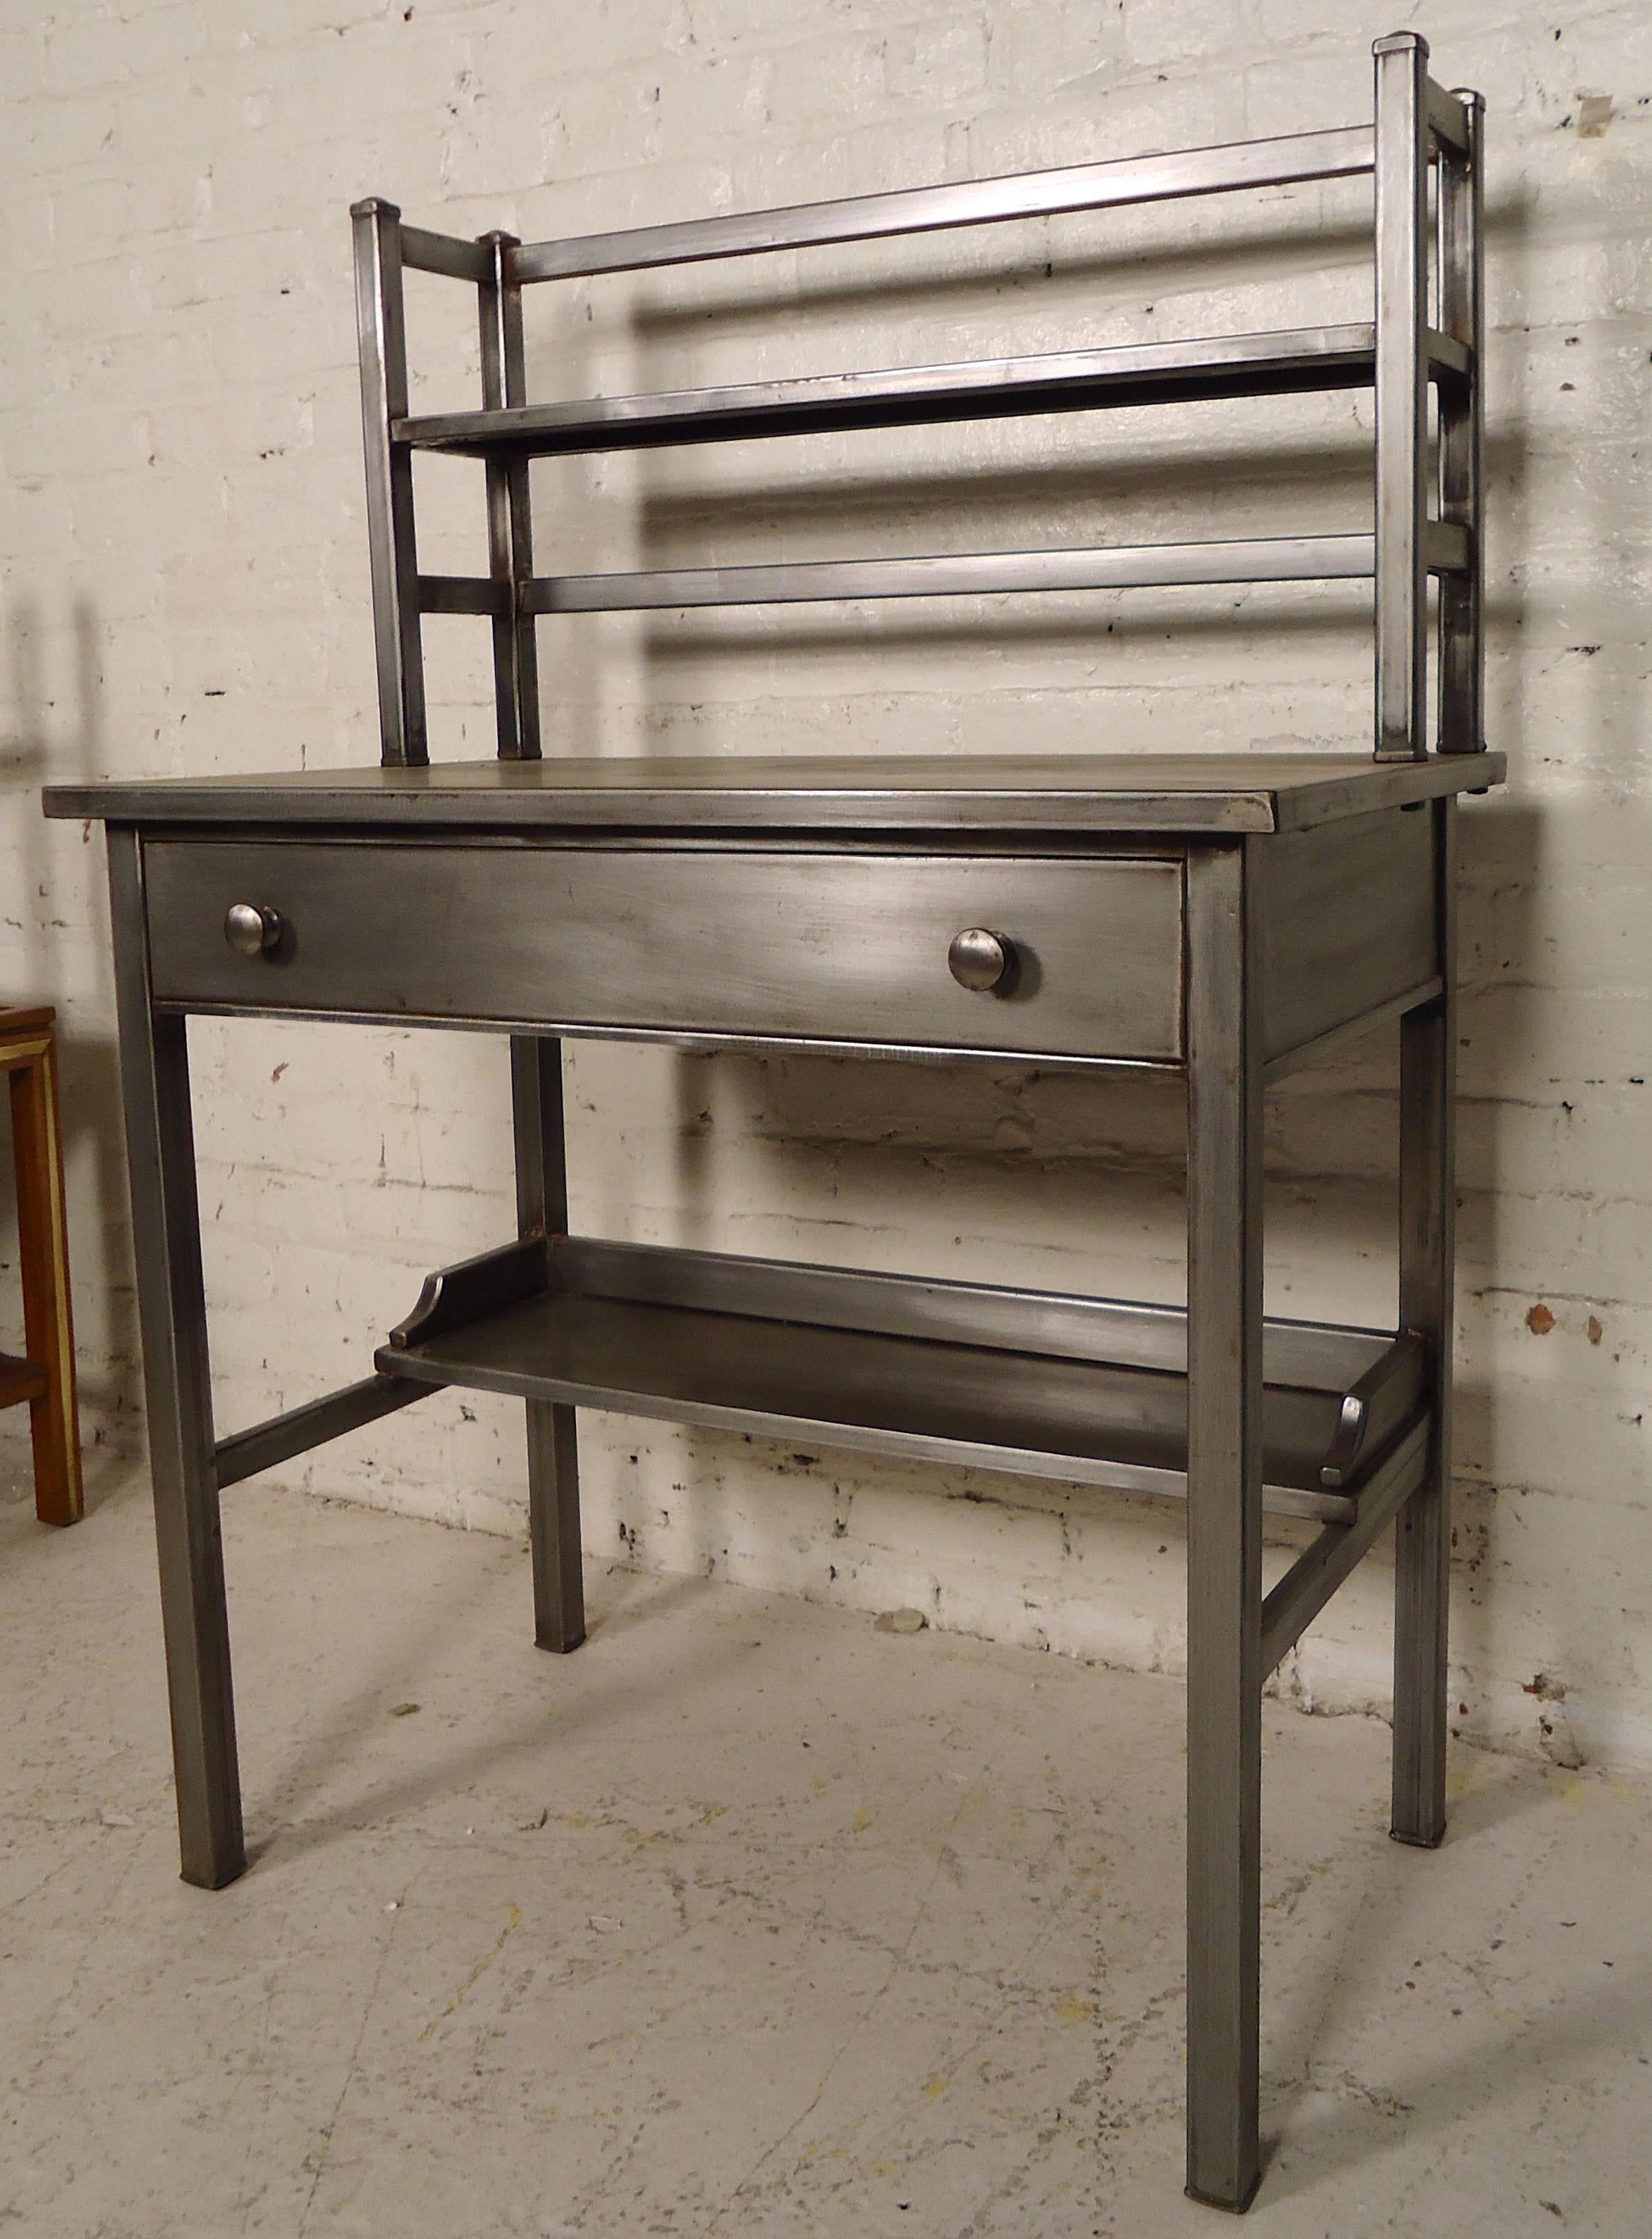 Striking metal desk restored in a bare metal style finish. Attaches bookshelf, bottom footrest and wide drawer.
Kneehole measures: 27" W, 9" D, 23" H.

(Please confirm item location - NY or NJ - with dealer).
 